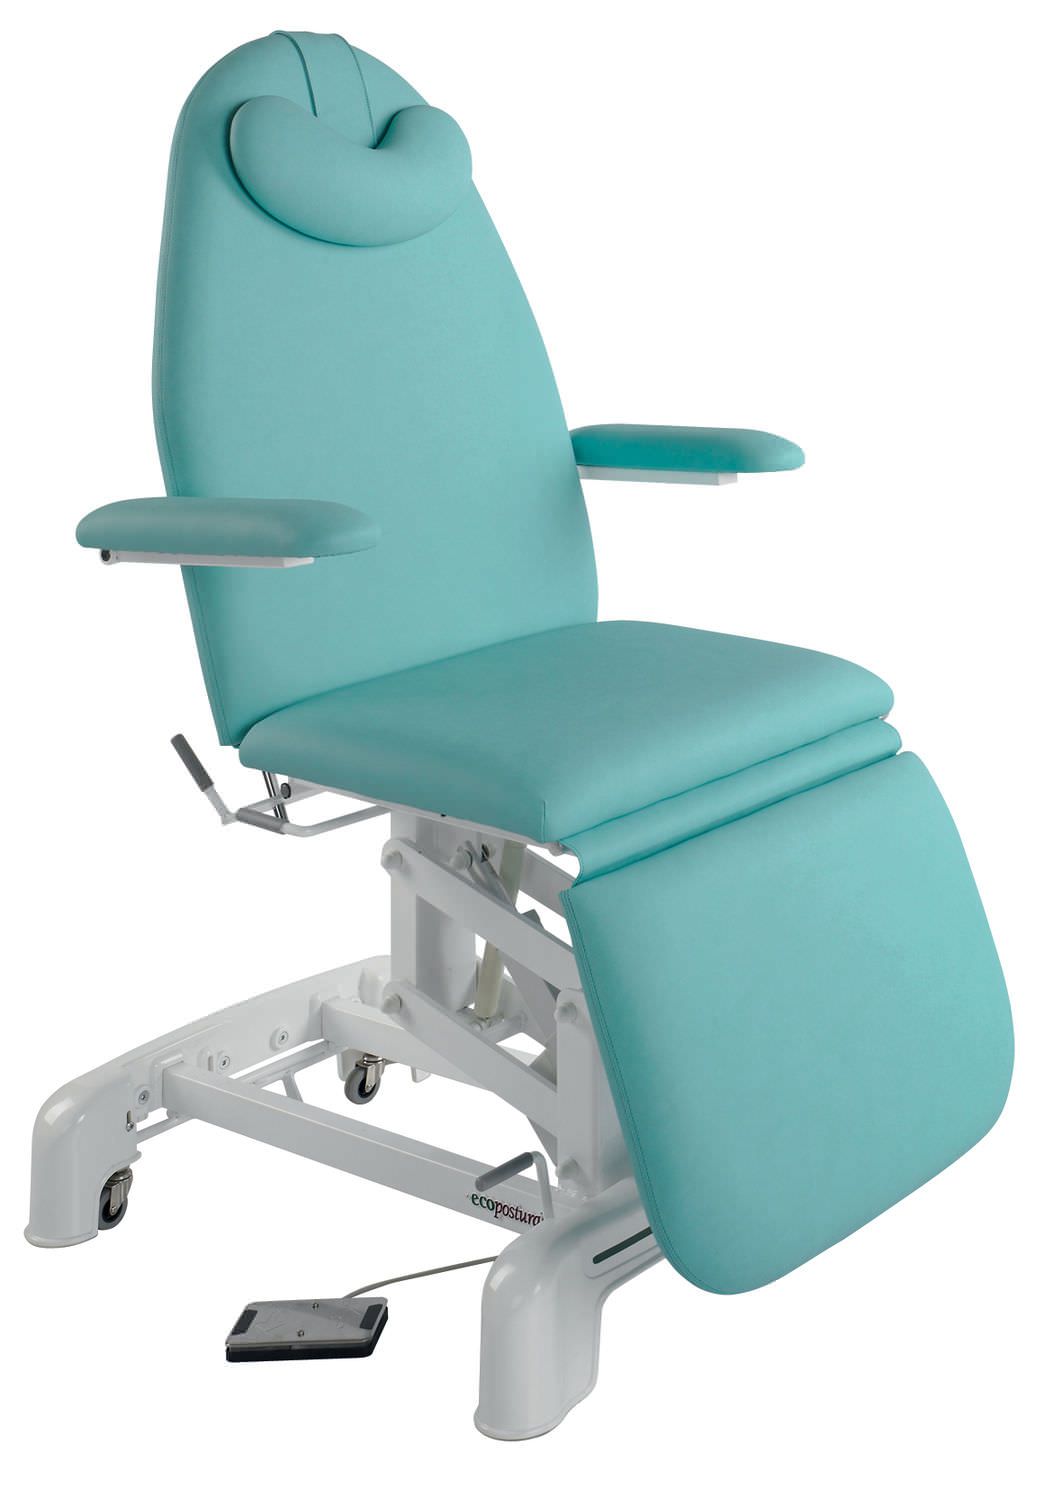 Medical examination chair / electrical / height-adjustable / 3-section C-3571-M41 Ecopostural